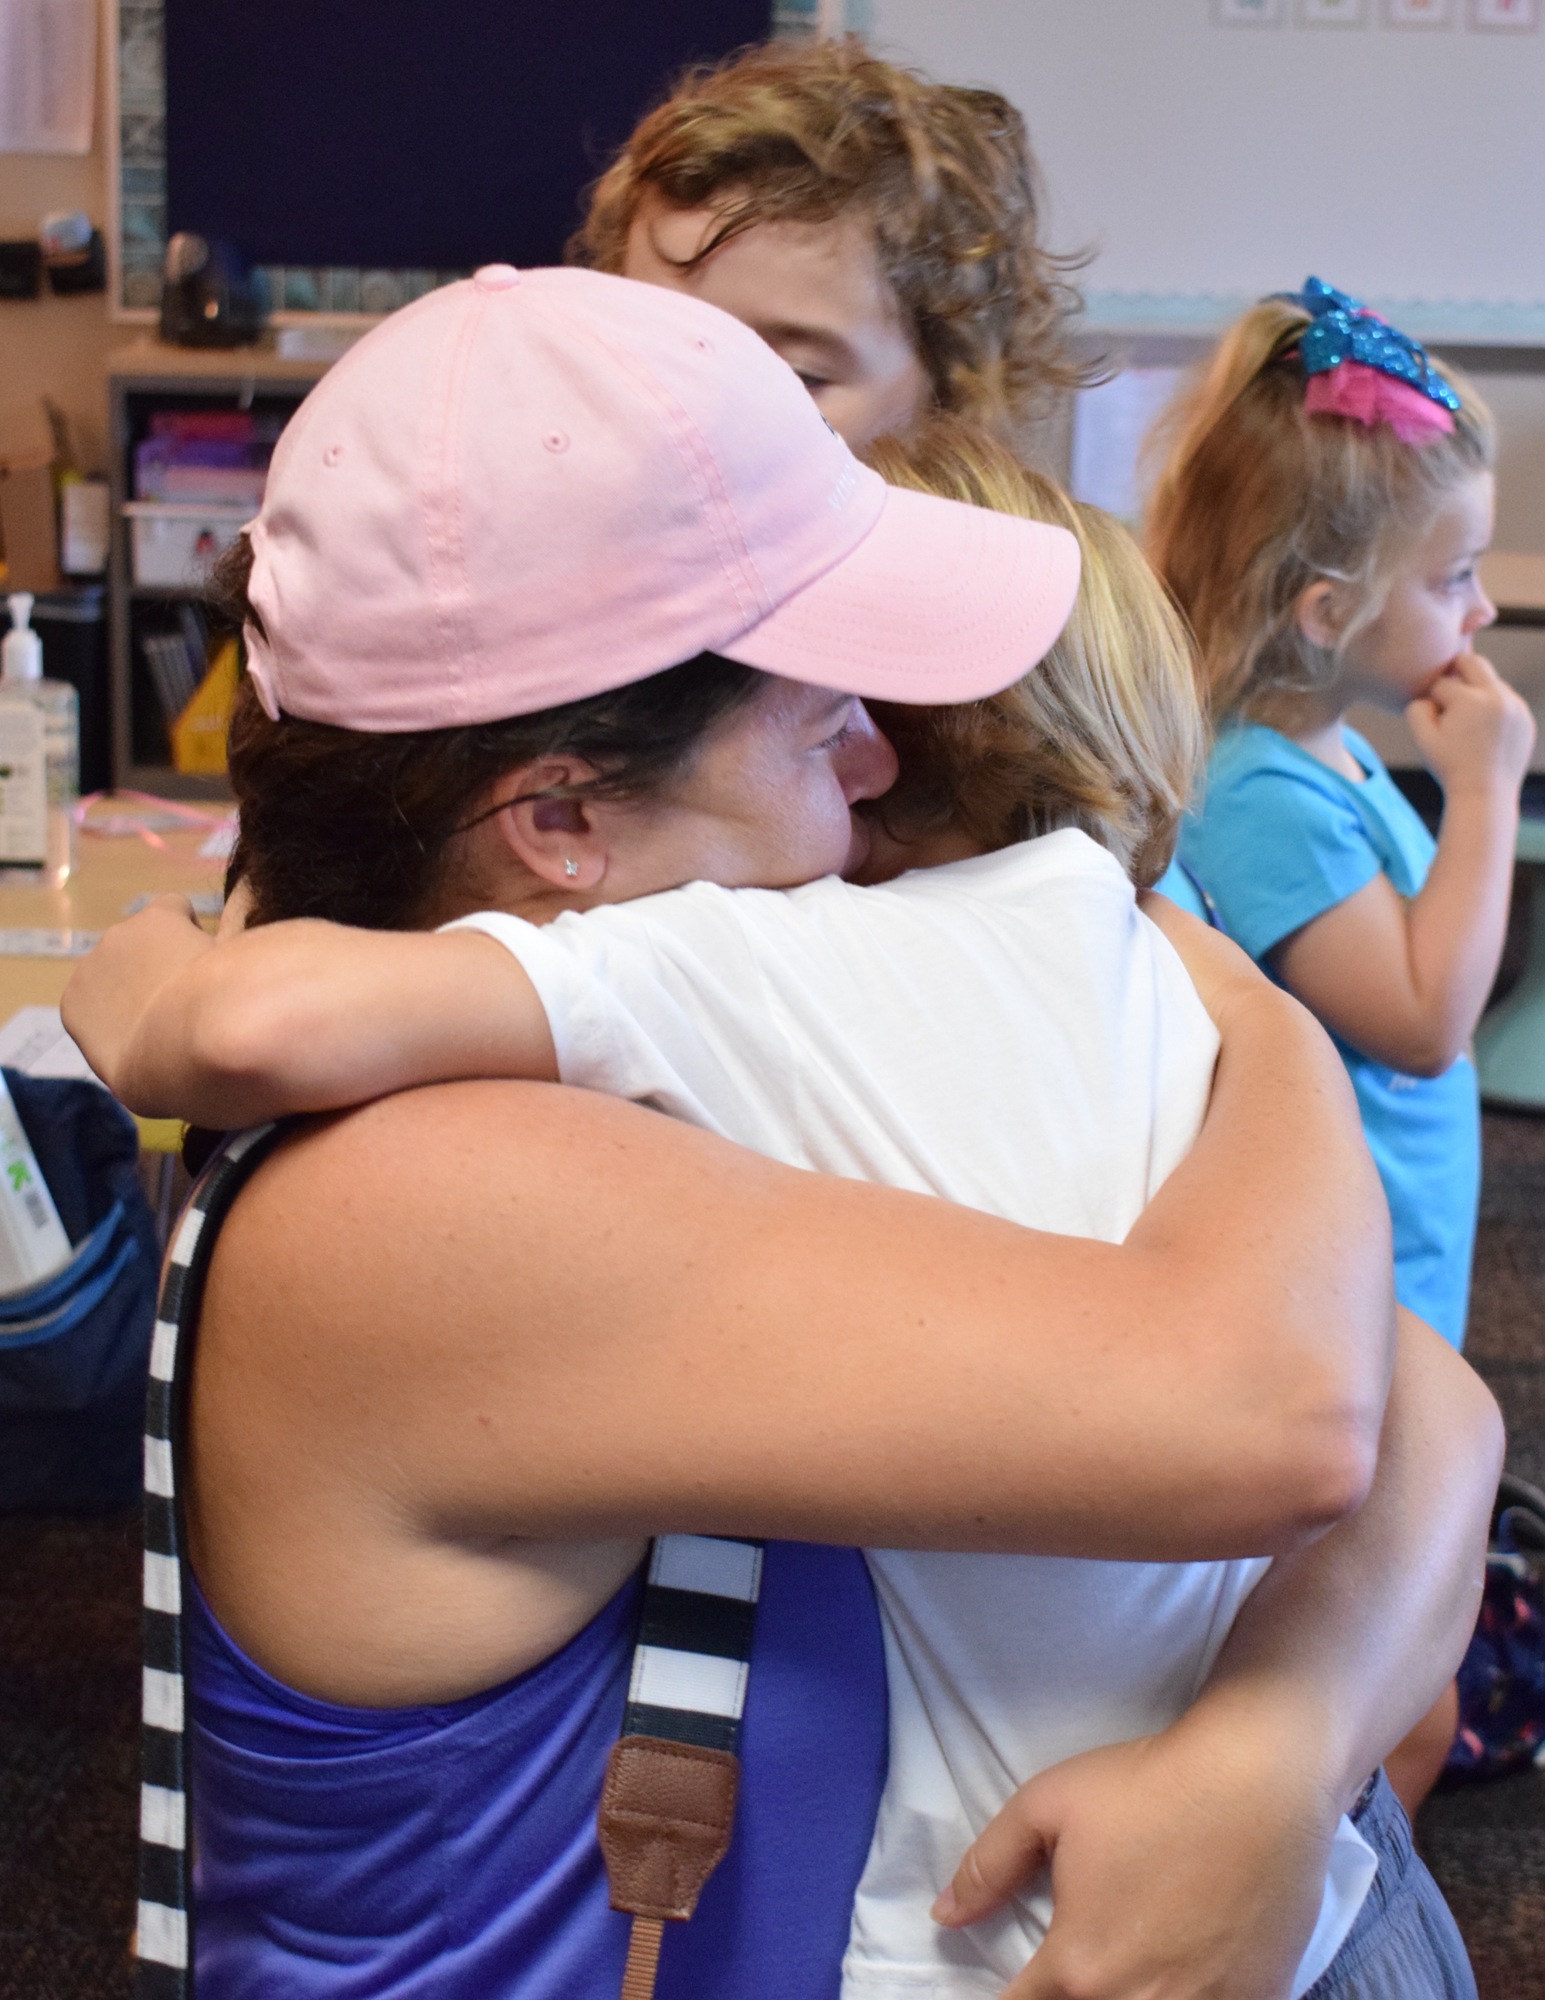 Greenbrook resident Melissa Murphy hugs her 5-year-old son Logan goodbye before leaving his kindergarten class to take her 7-year-old son Austin to his second-grade class.